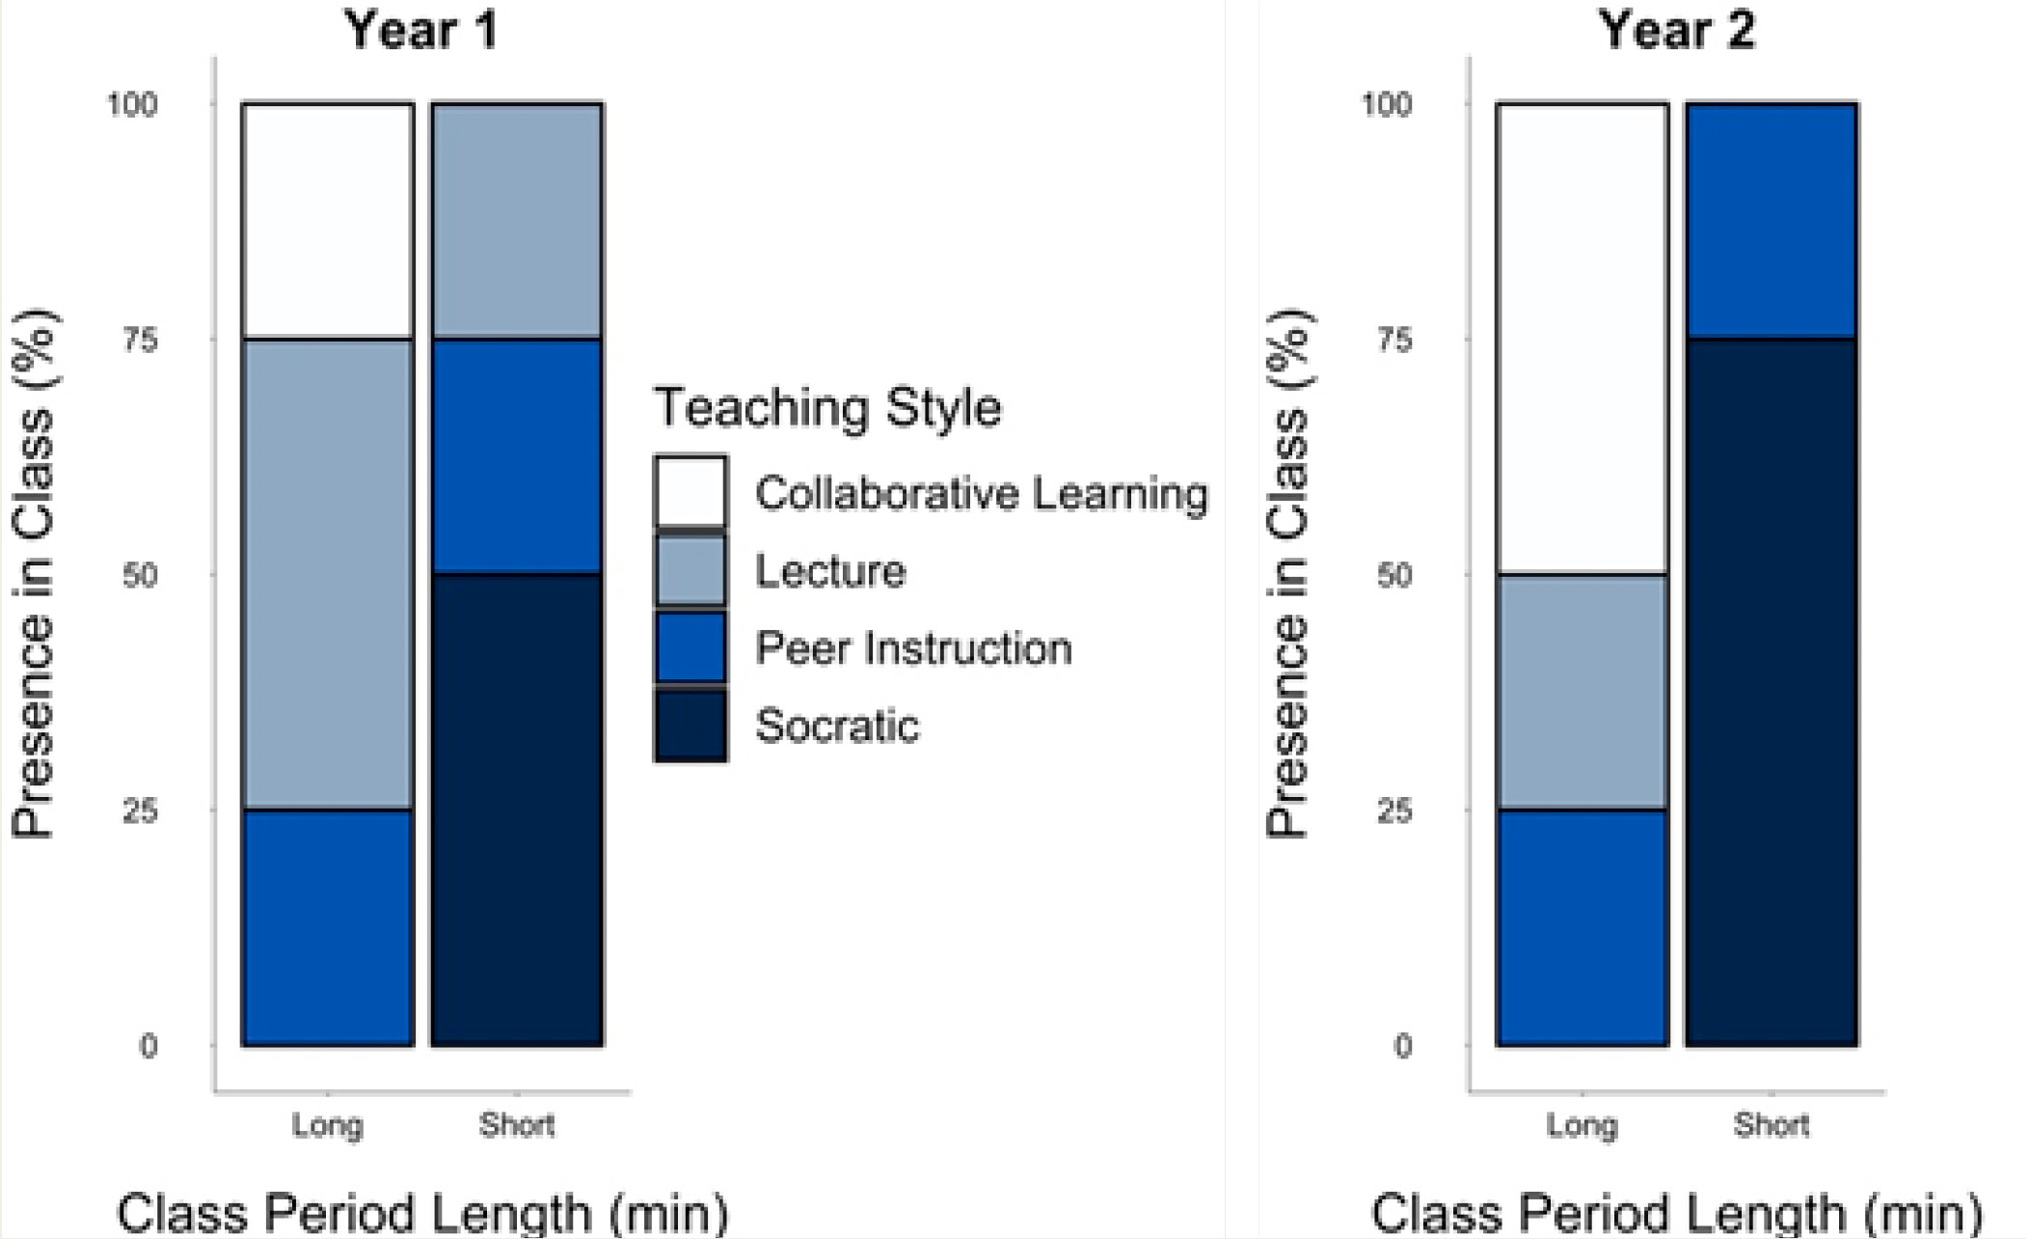 Figure 2 Presence (%) of each teaching style per class period length in Year 1 and Year 2.